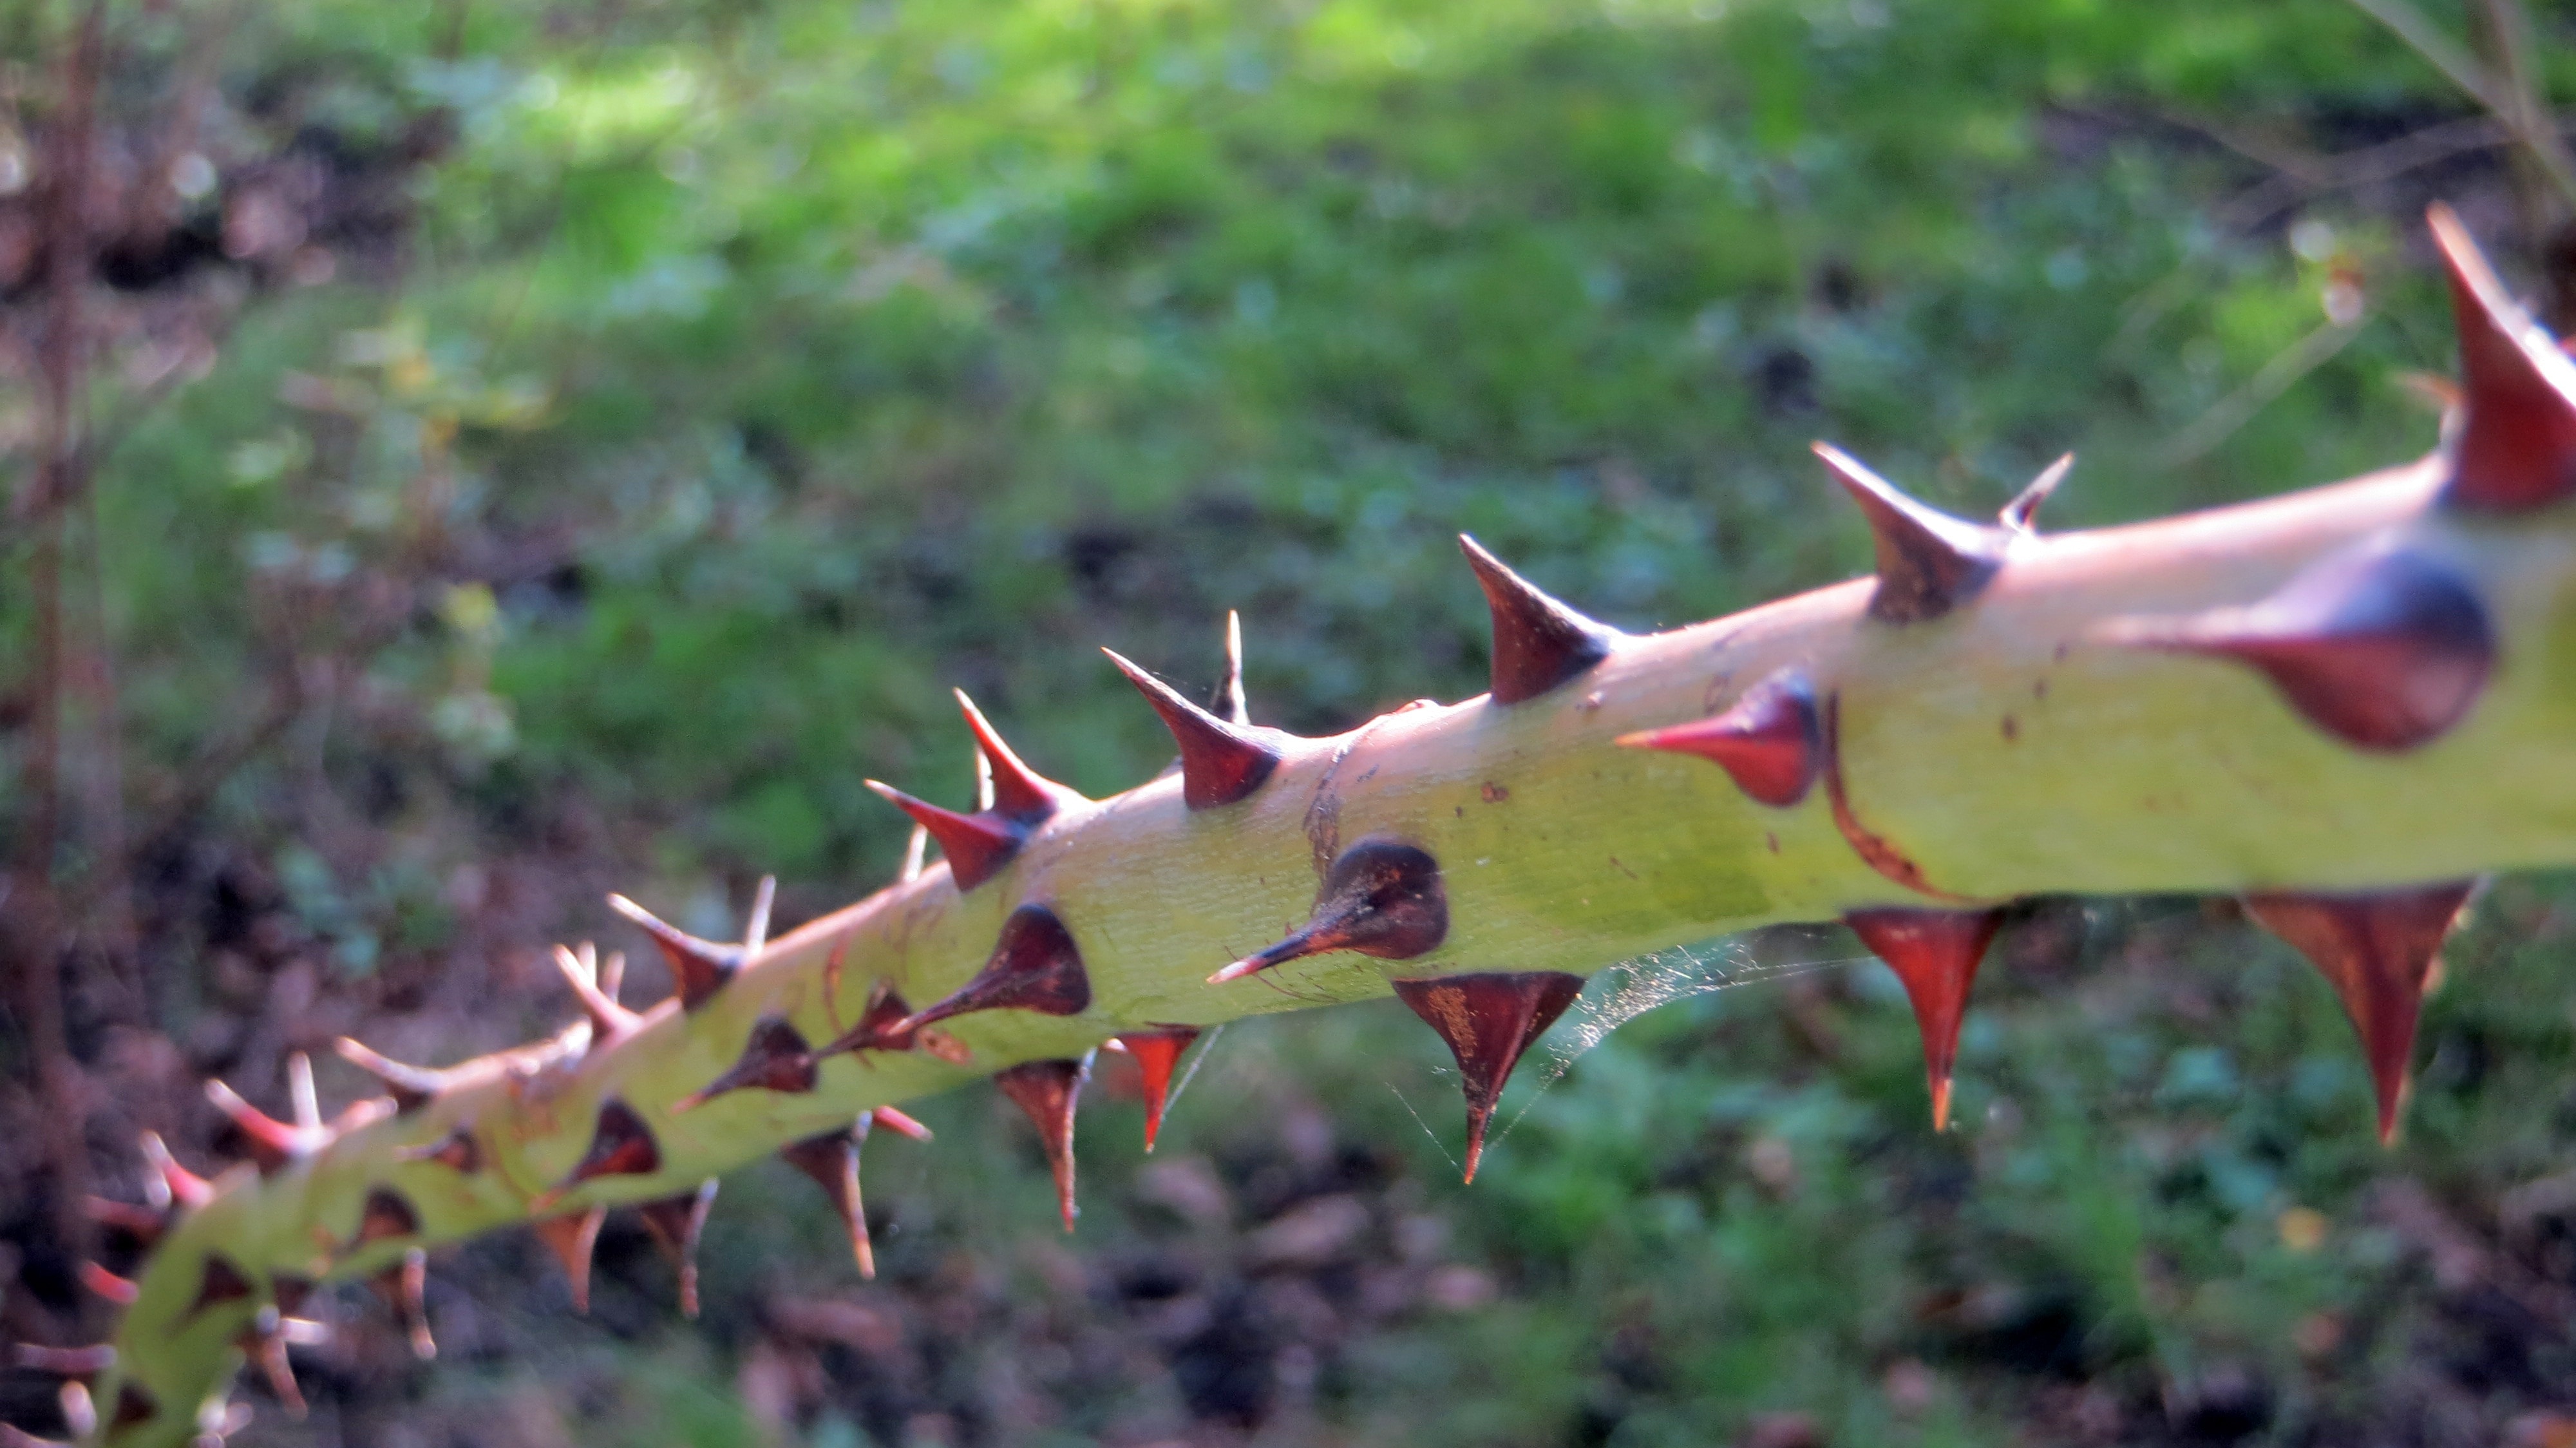 Pointed, Sharp, Branch, Prickly, Thorns, outdoors, day